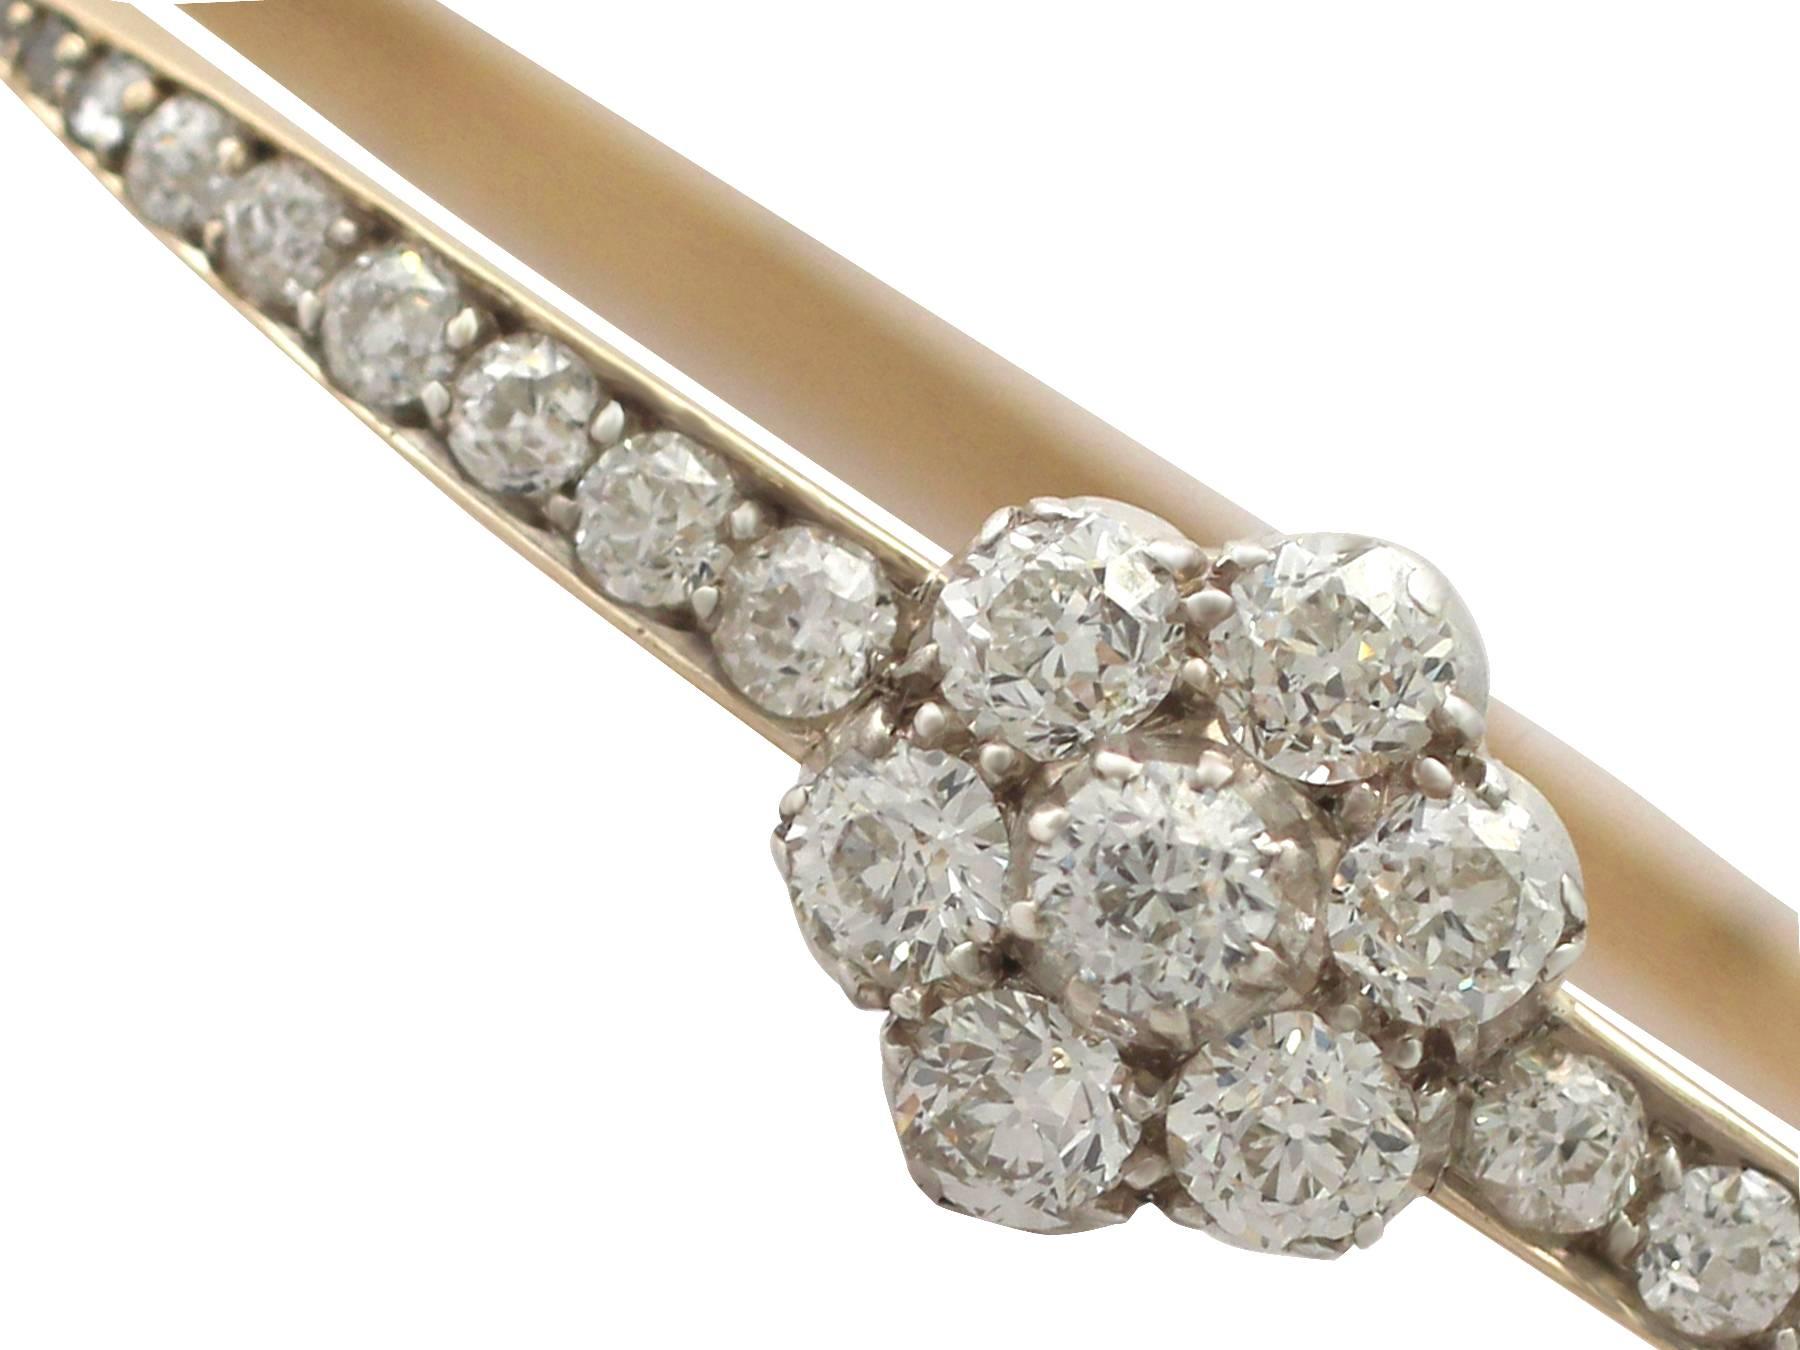 A stunning, fine and impressive antique Victorian 2.88 carat diamond and 15 karat yellow gold, silver set bangle; part of our diverse antique jewelry and estate jewelry collections

This stunning, fine and impressive antique diamond bangle has